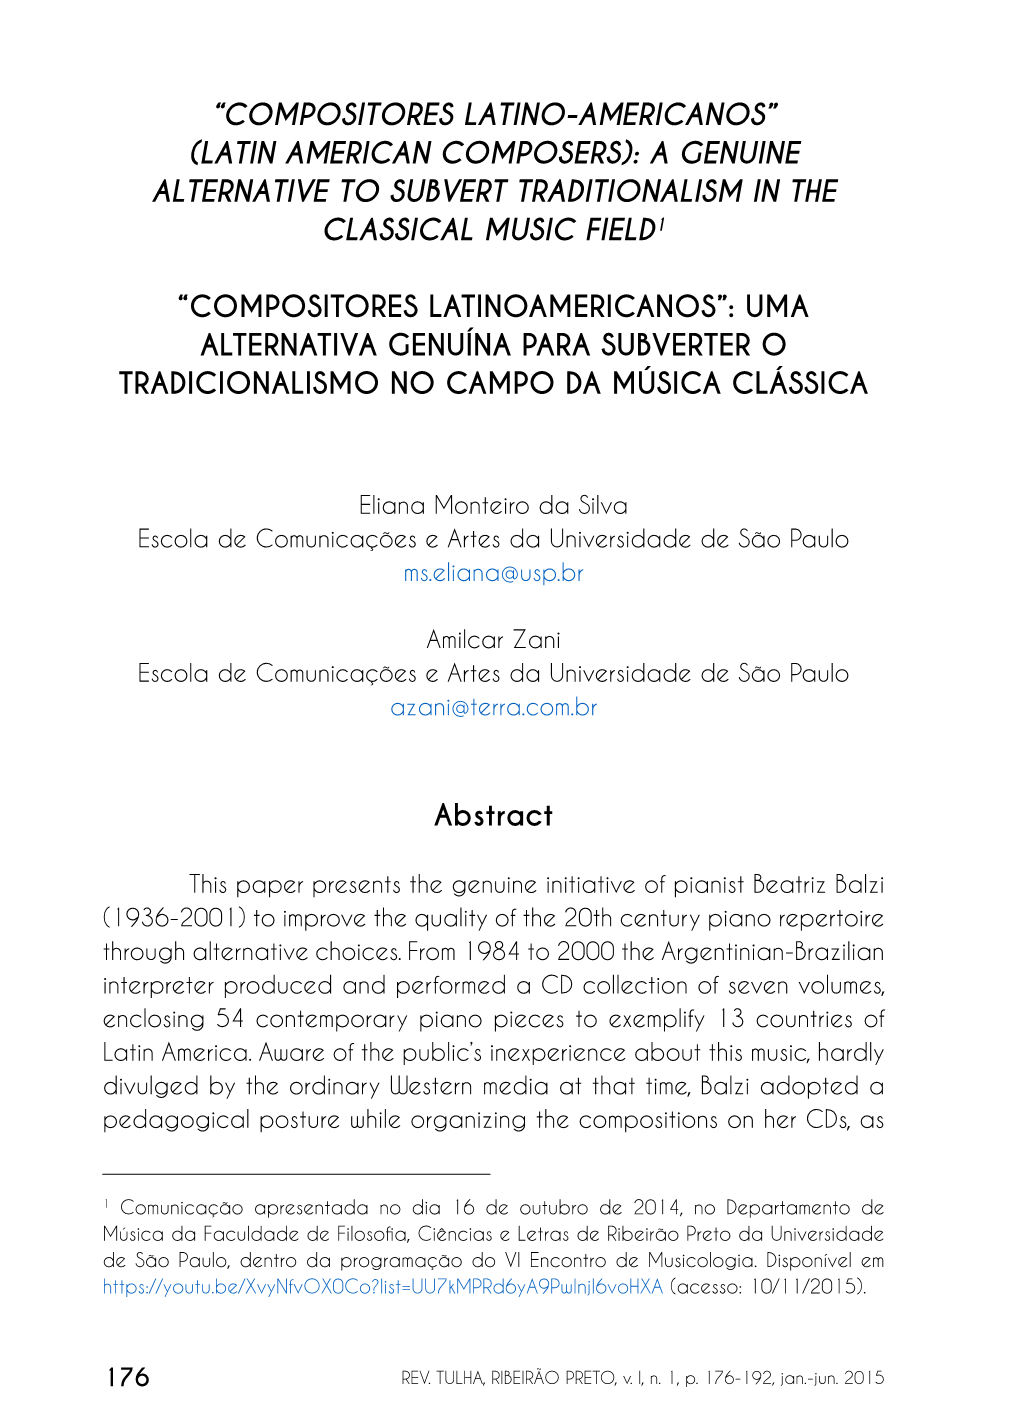 “Compositores Latino-Americanos” (Latin American Composers): a Genuine Alternative to Subvert Traditionalism in the Classical Music Field1